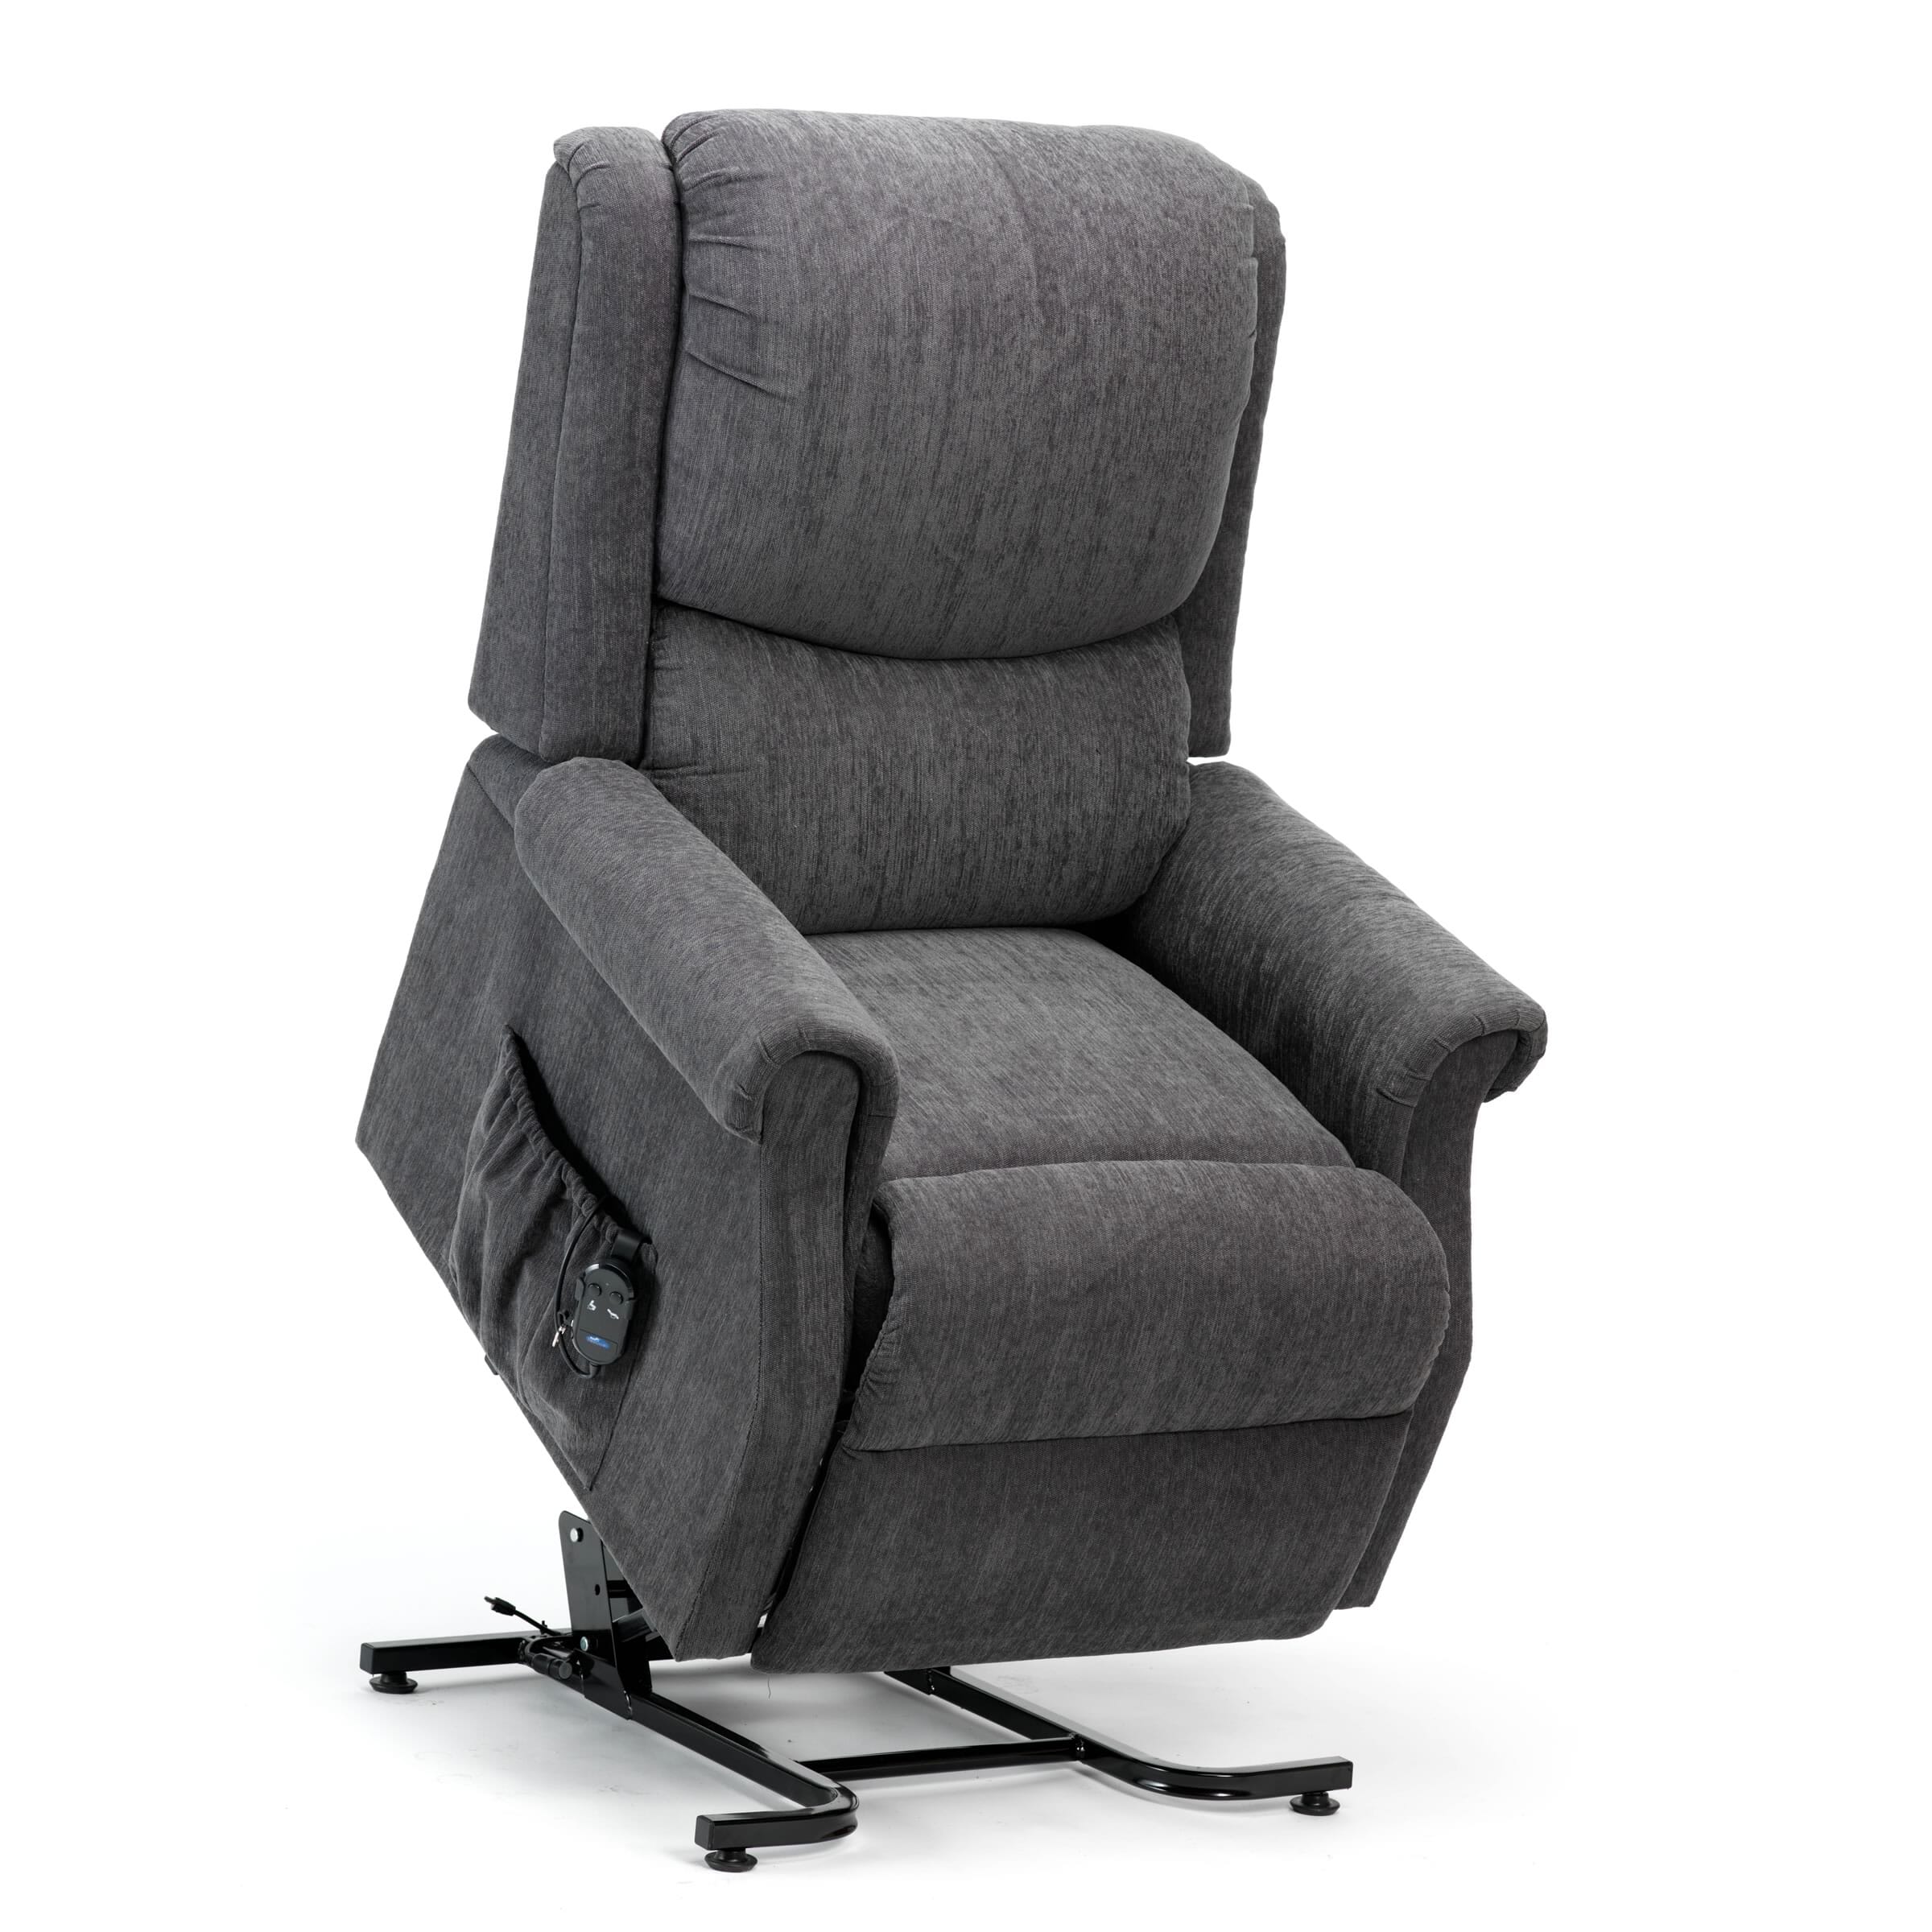 View Indiana Rise and Recline Chair Petite Charcoal information